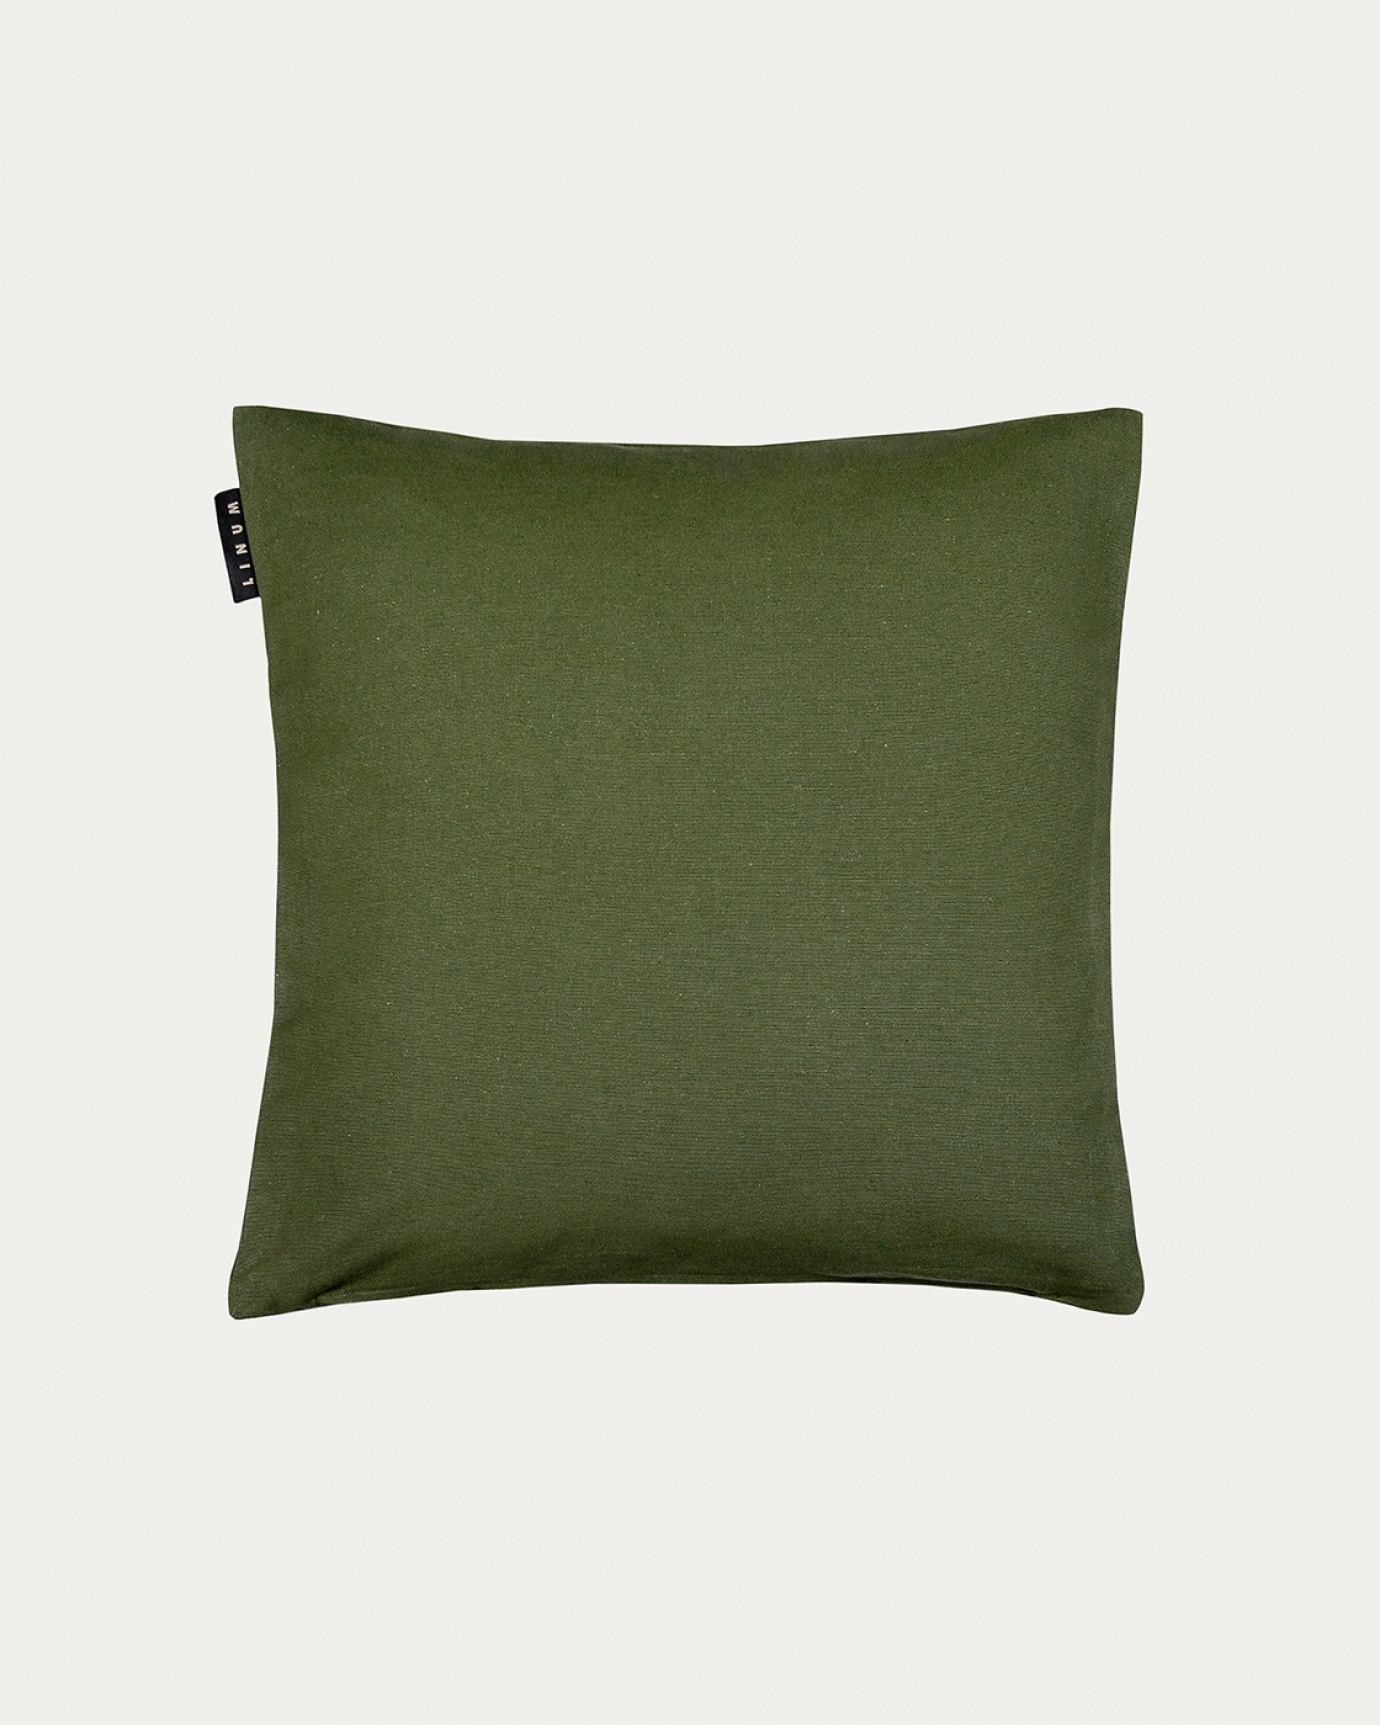 Product image dark olive green ANNABELL cushion cover made of soft cotton from LINUM DESIGN. Size 40x40 cm.